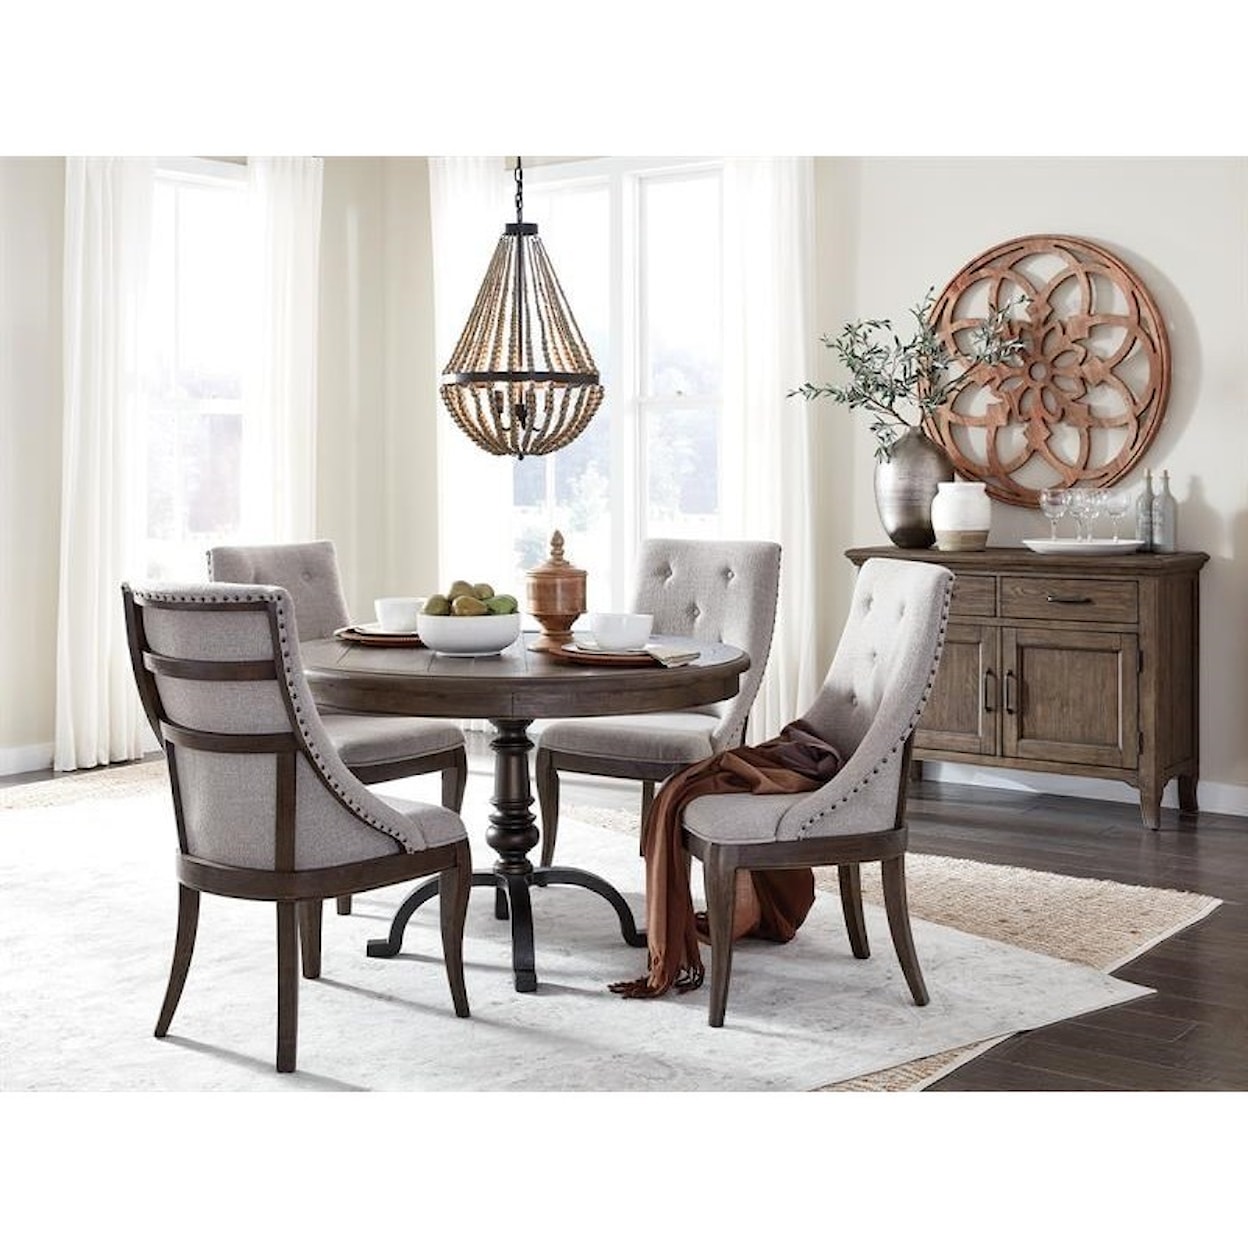 Belfort Select Withers Grove Dining Arm Chair